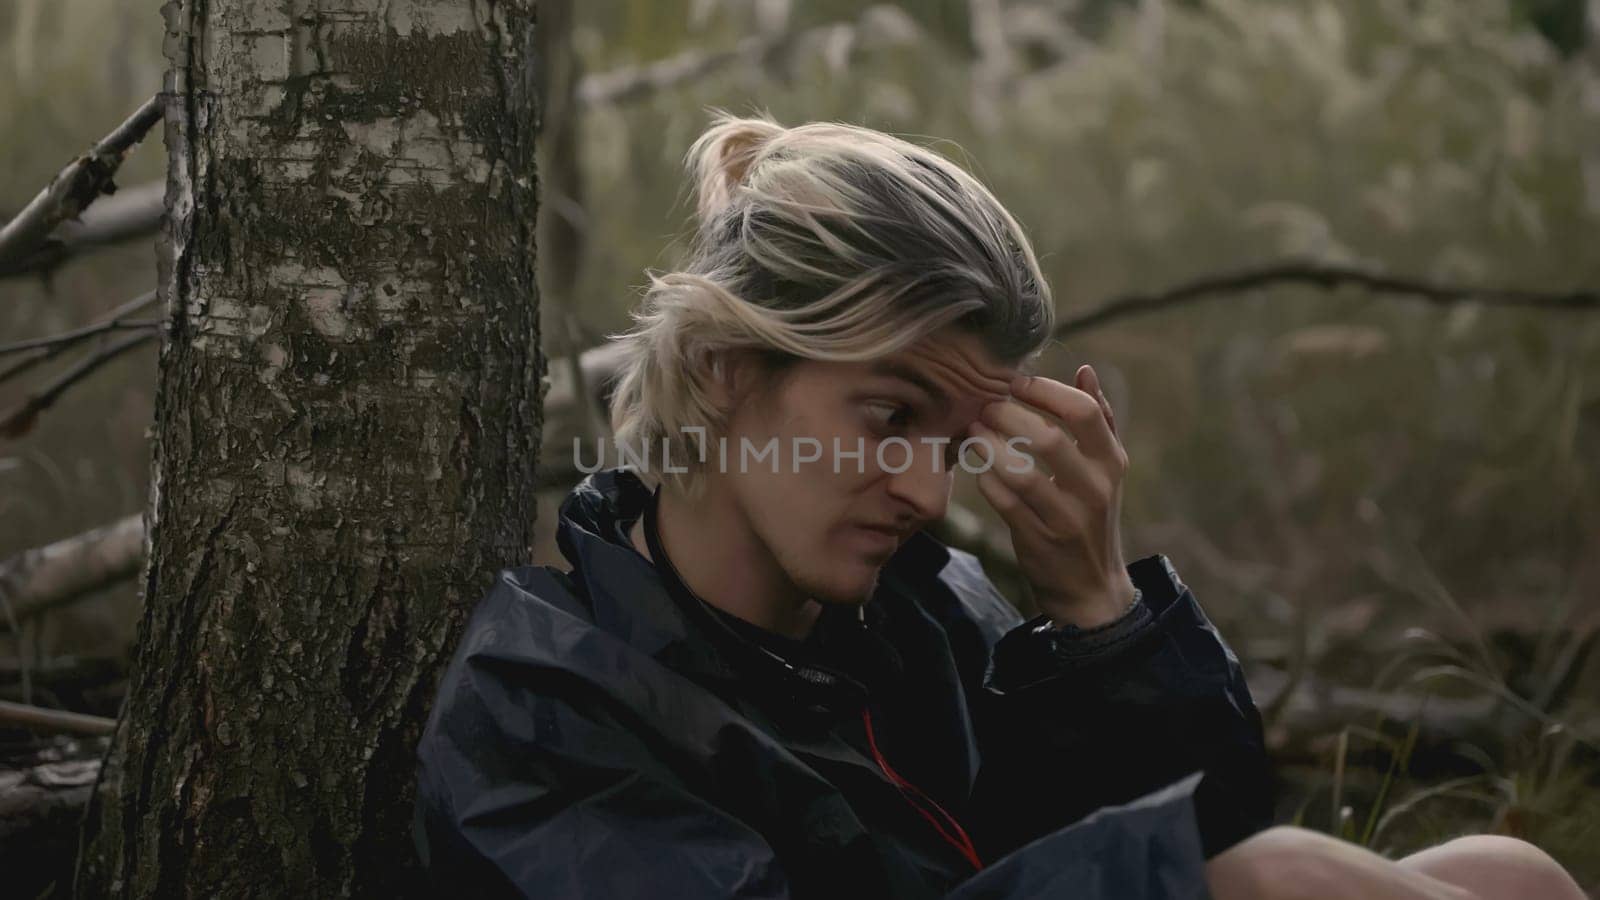 Young man sits in despair by tree in forest. Stock. Young man got lost and is sitting by tree in forest. Man got tired of hiking and got lost.